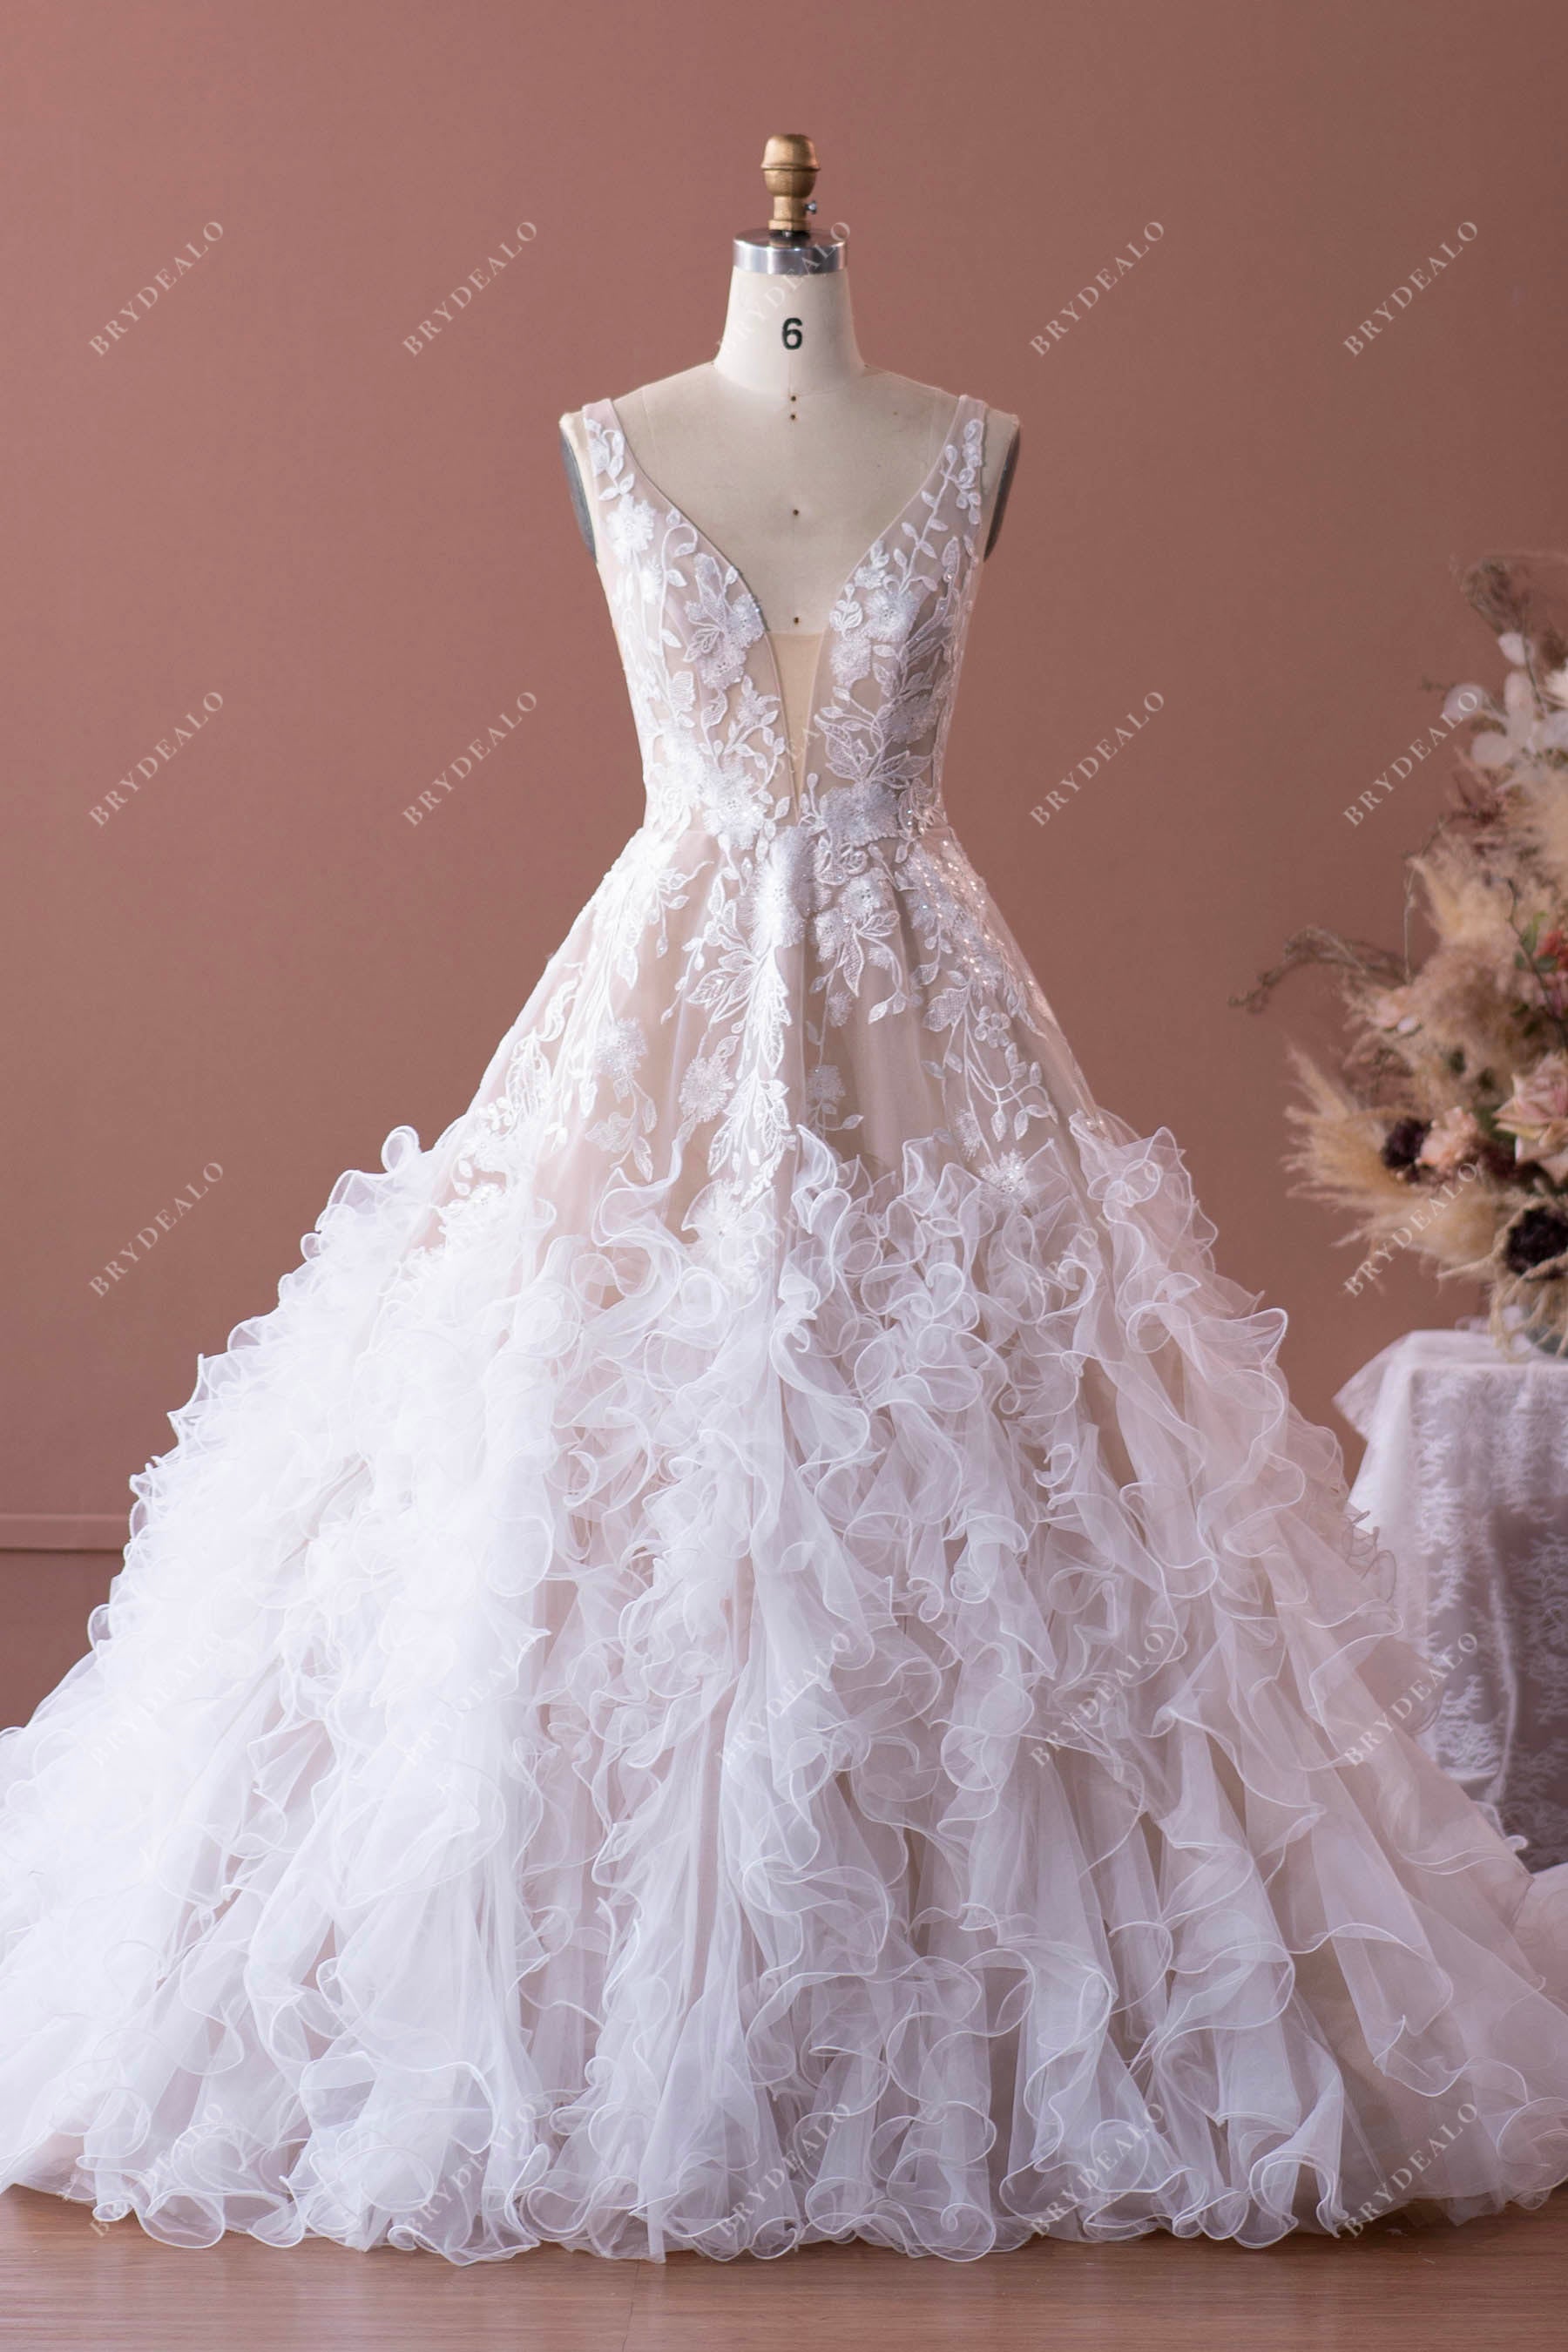 designer flower lace ruffled tulle puffy A-line wedding dress sample sale